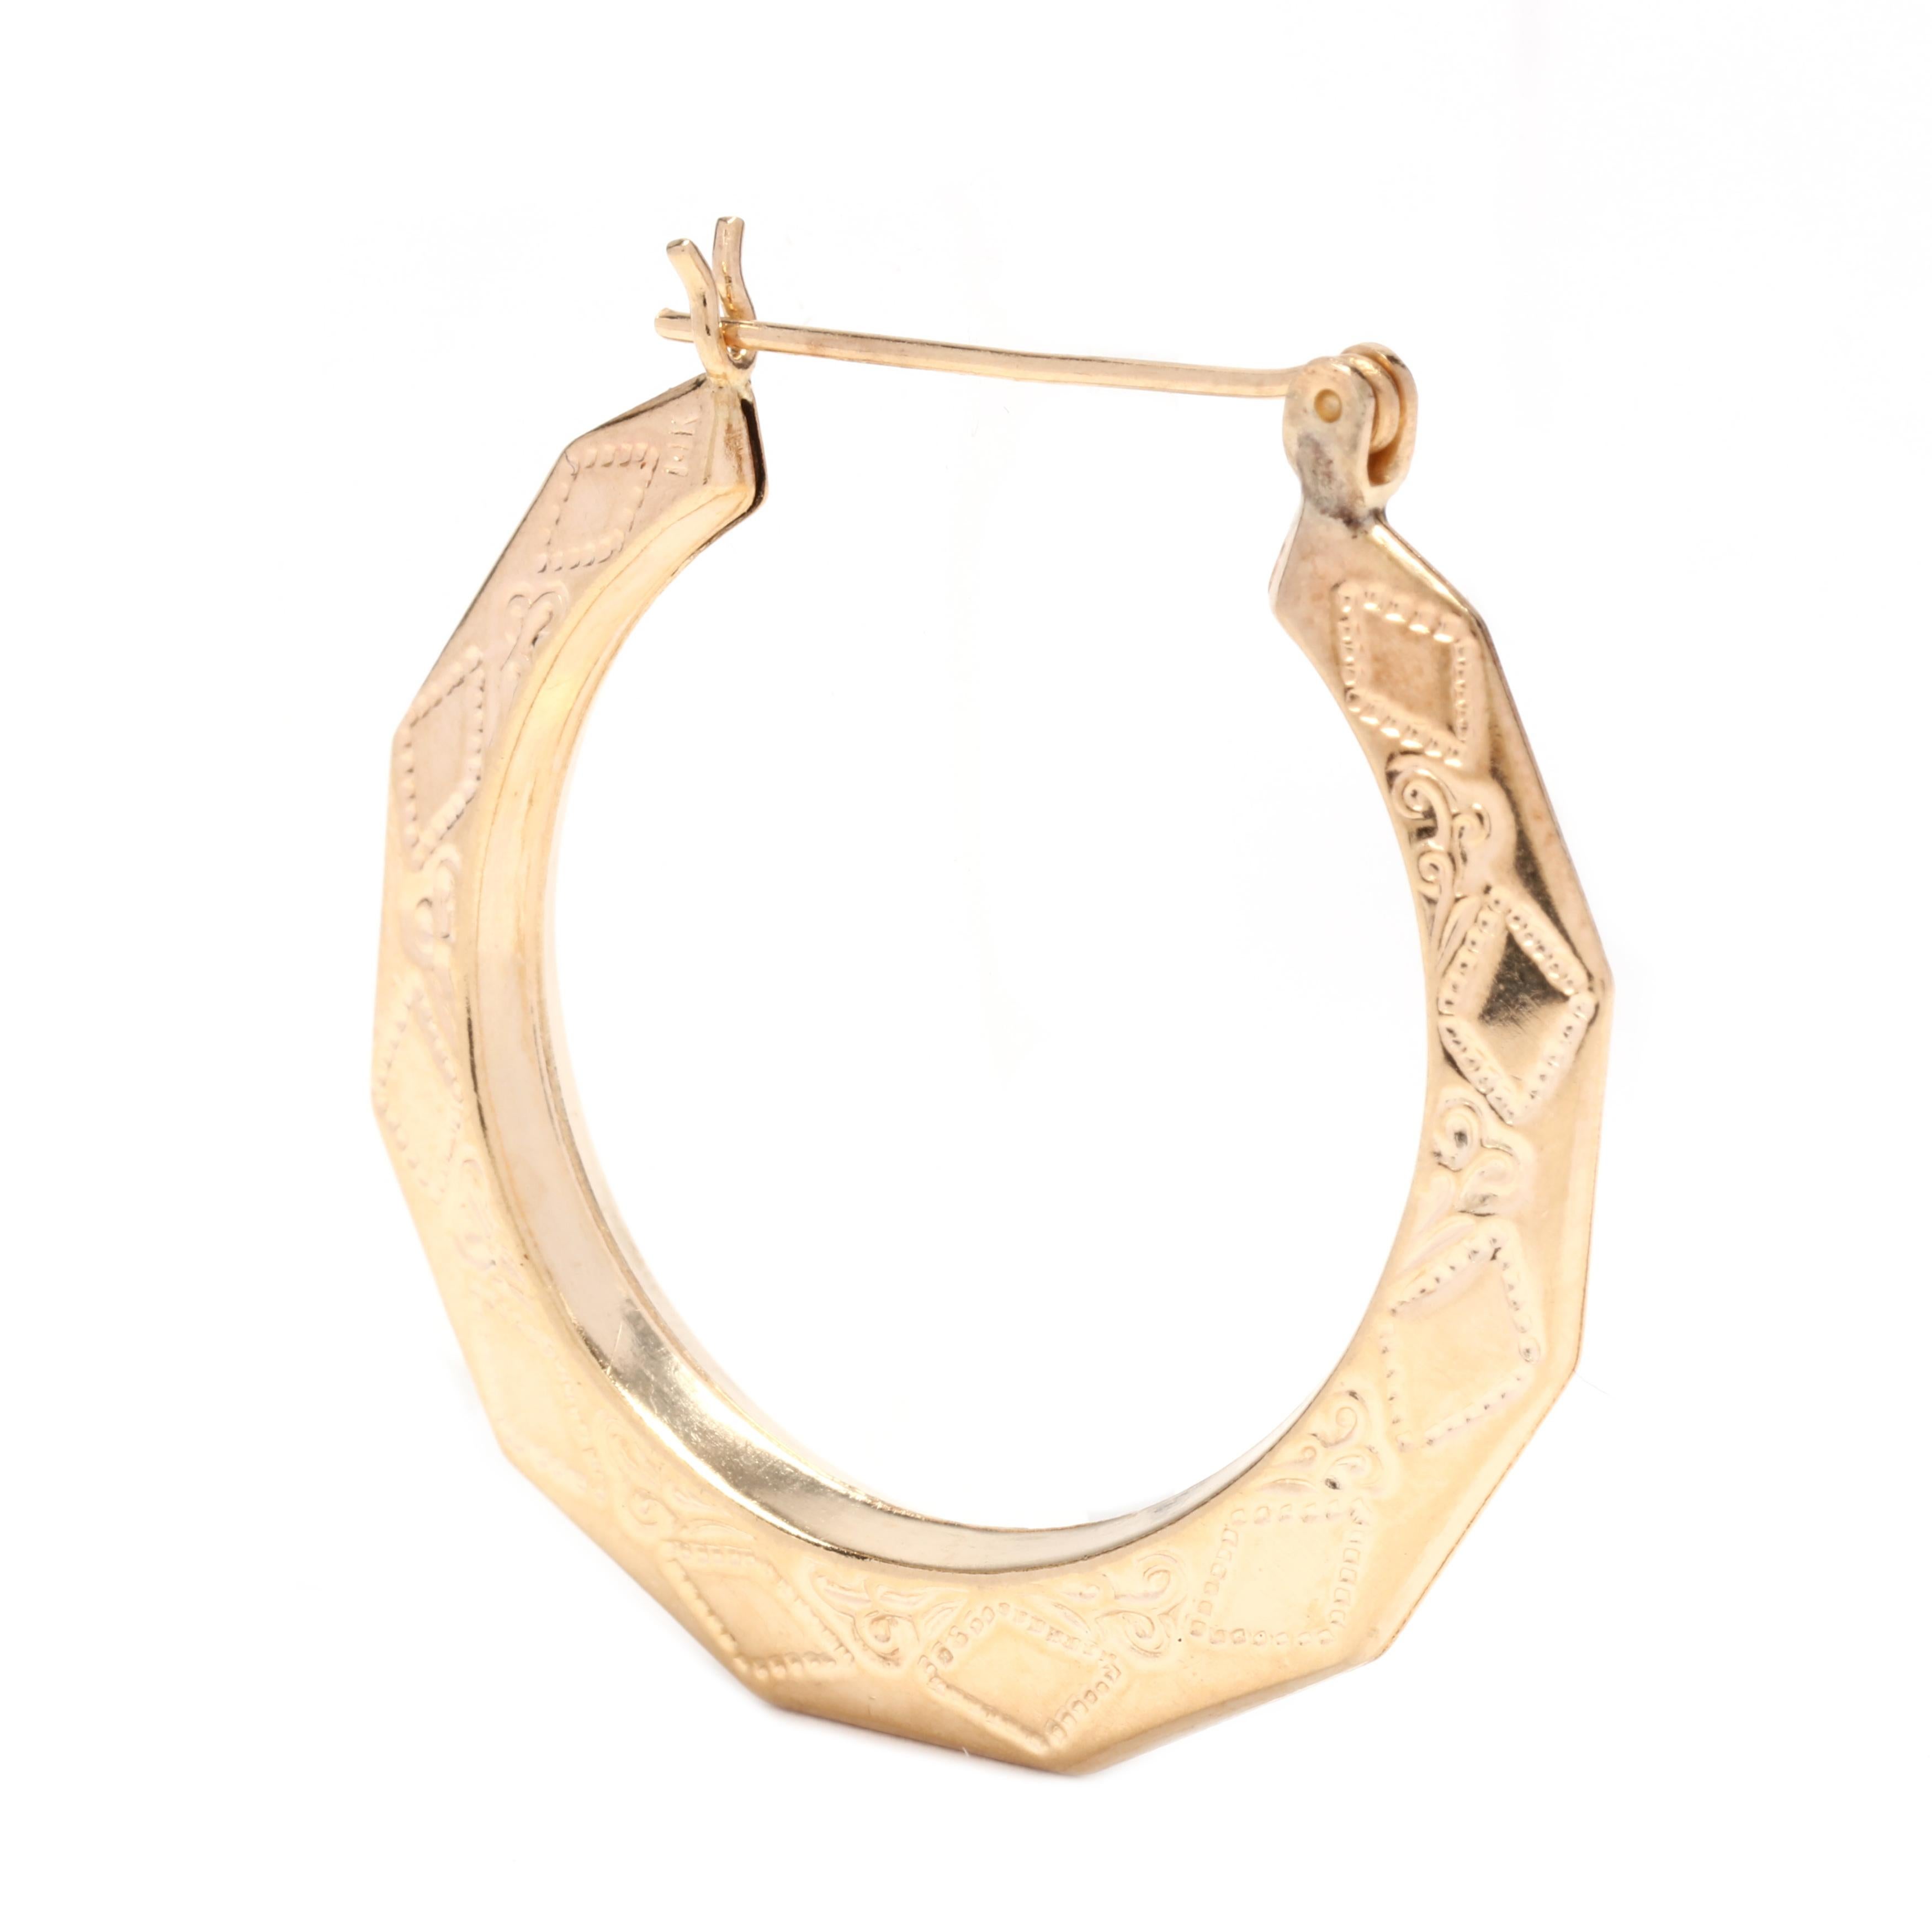 A pair of vintage 14 karat yellow gold geometric engraved hoop earrings. These earrings feature a tapered, faceted design with a geometric engraved design and snap posts.



Length: 1.25 in.



Weight: 2.8 dwts.